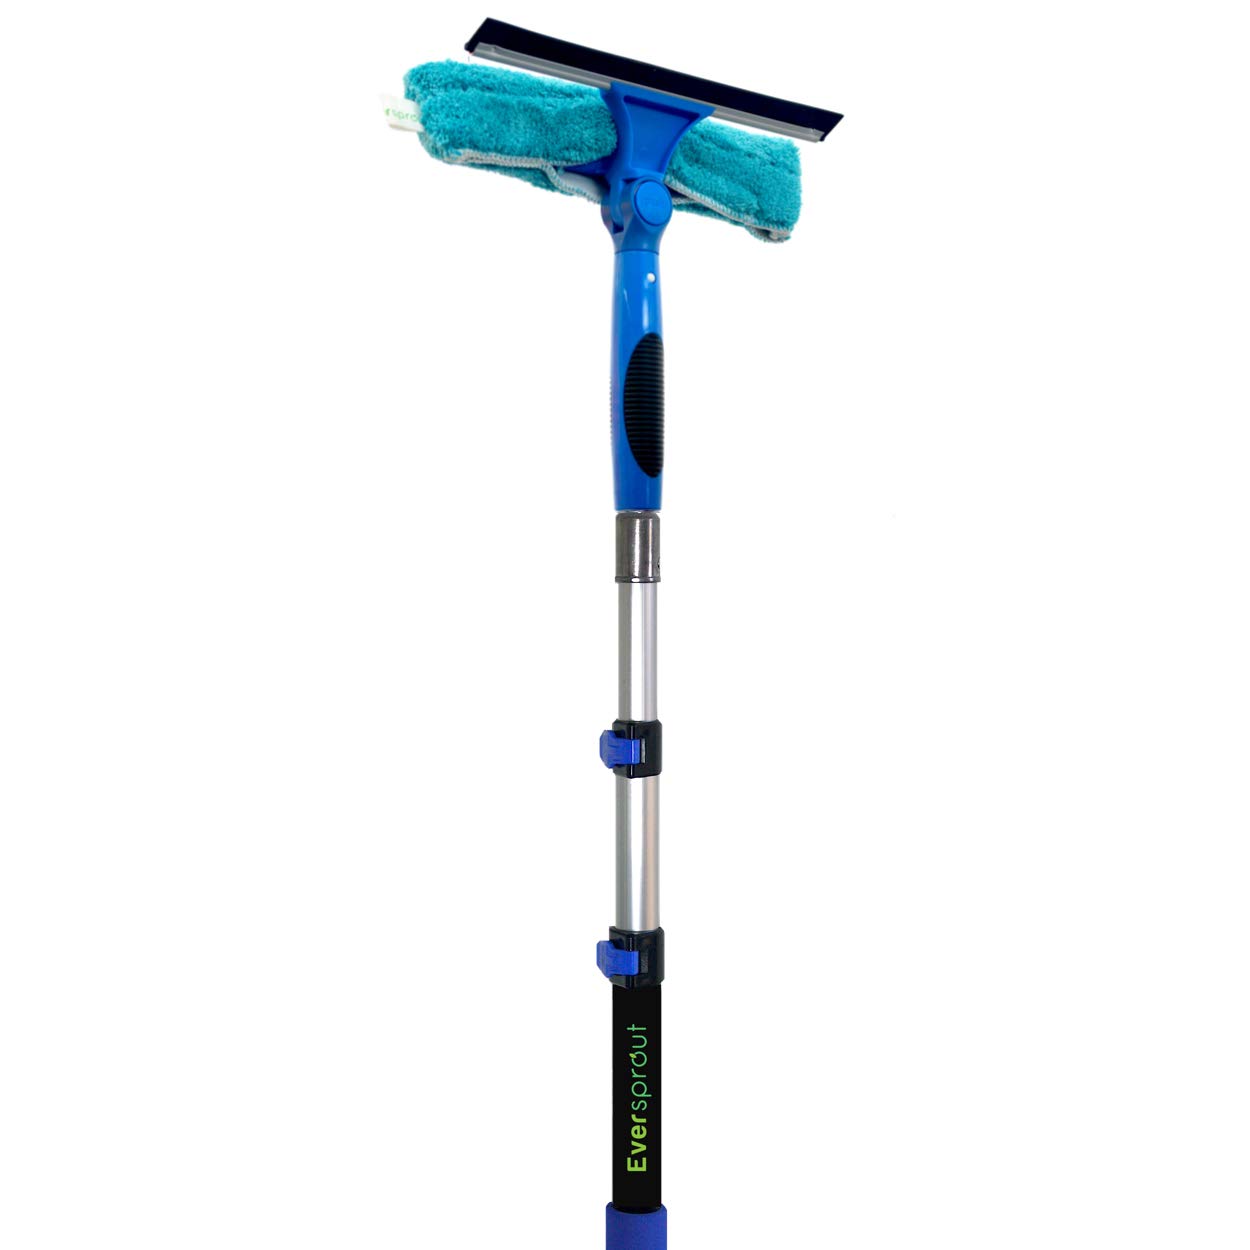 Dr.Dirt Swivel Window Squeegee,12 Inches Small Window Squeegee for